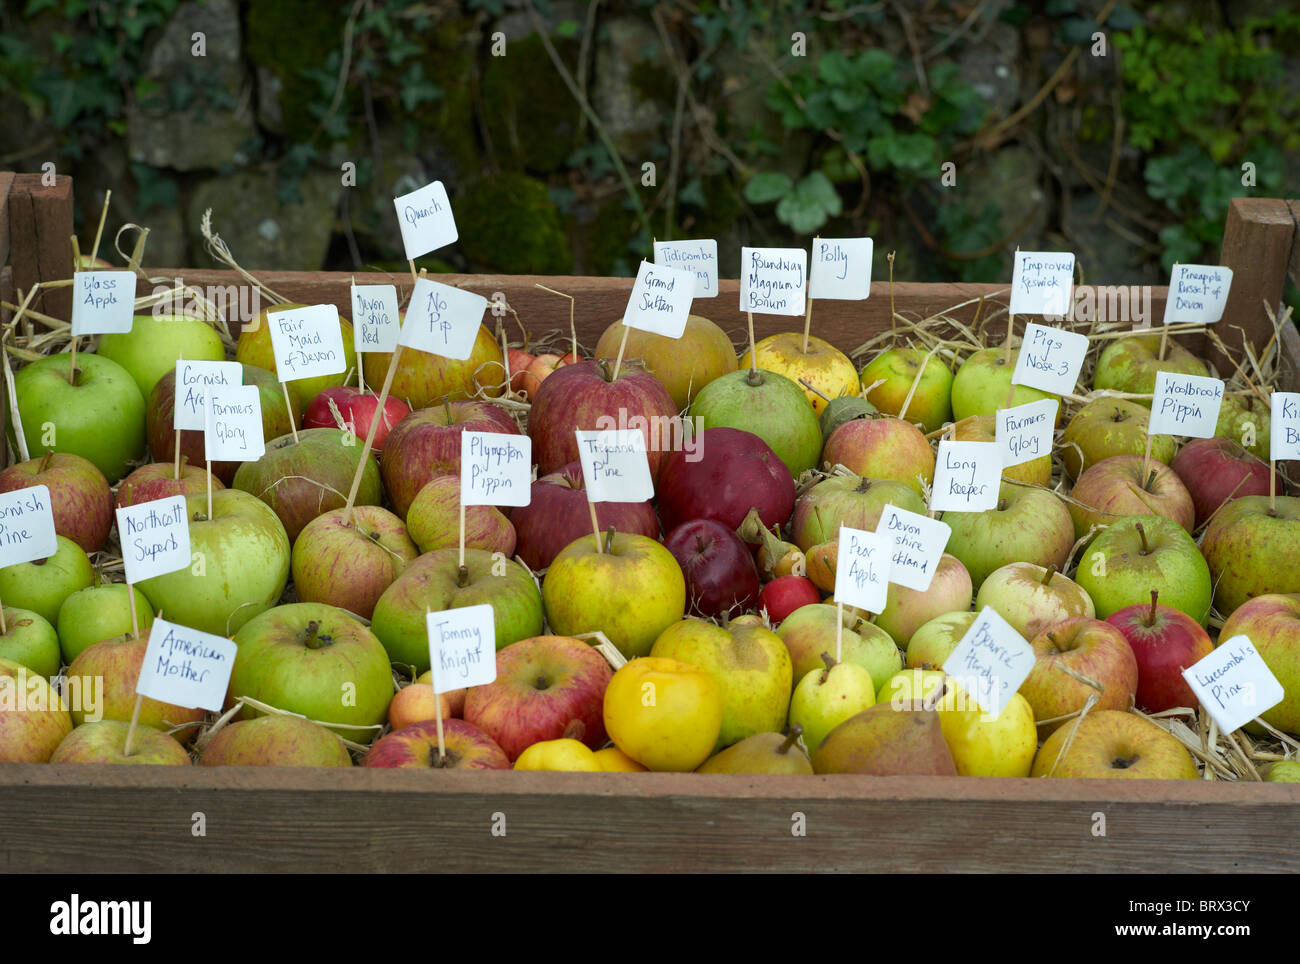 Labeled varieties of apples in a box show the diversity of apples grown in the UK Stock Photo